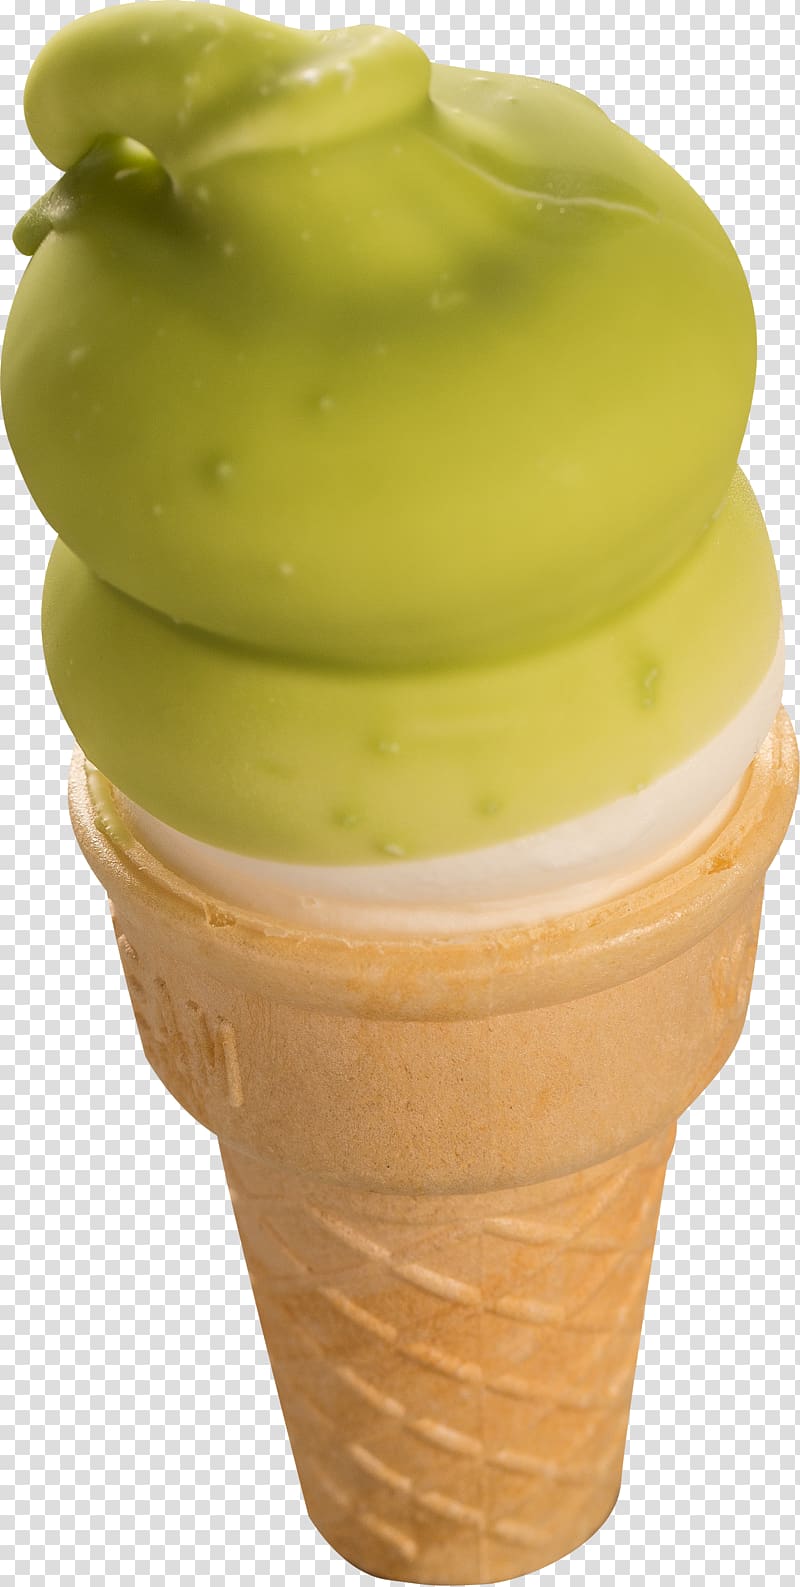 Green tea ice cream Green tea ice cream Iced tea, Green tea ice cream transparent background PNG clipart